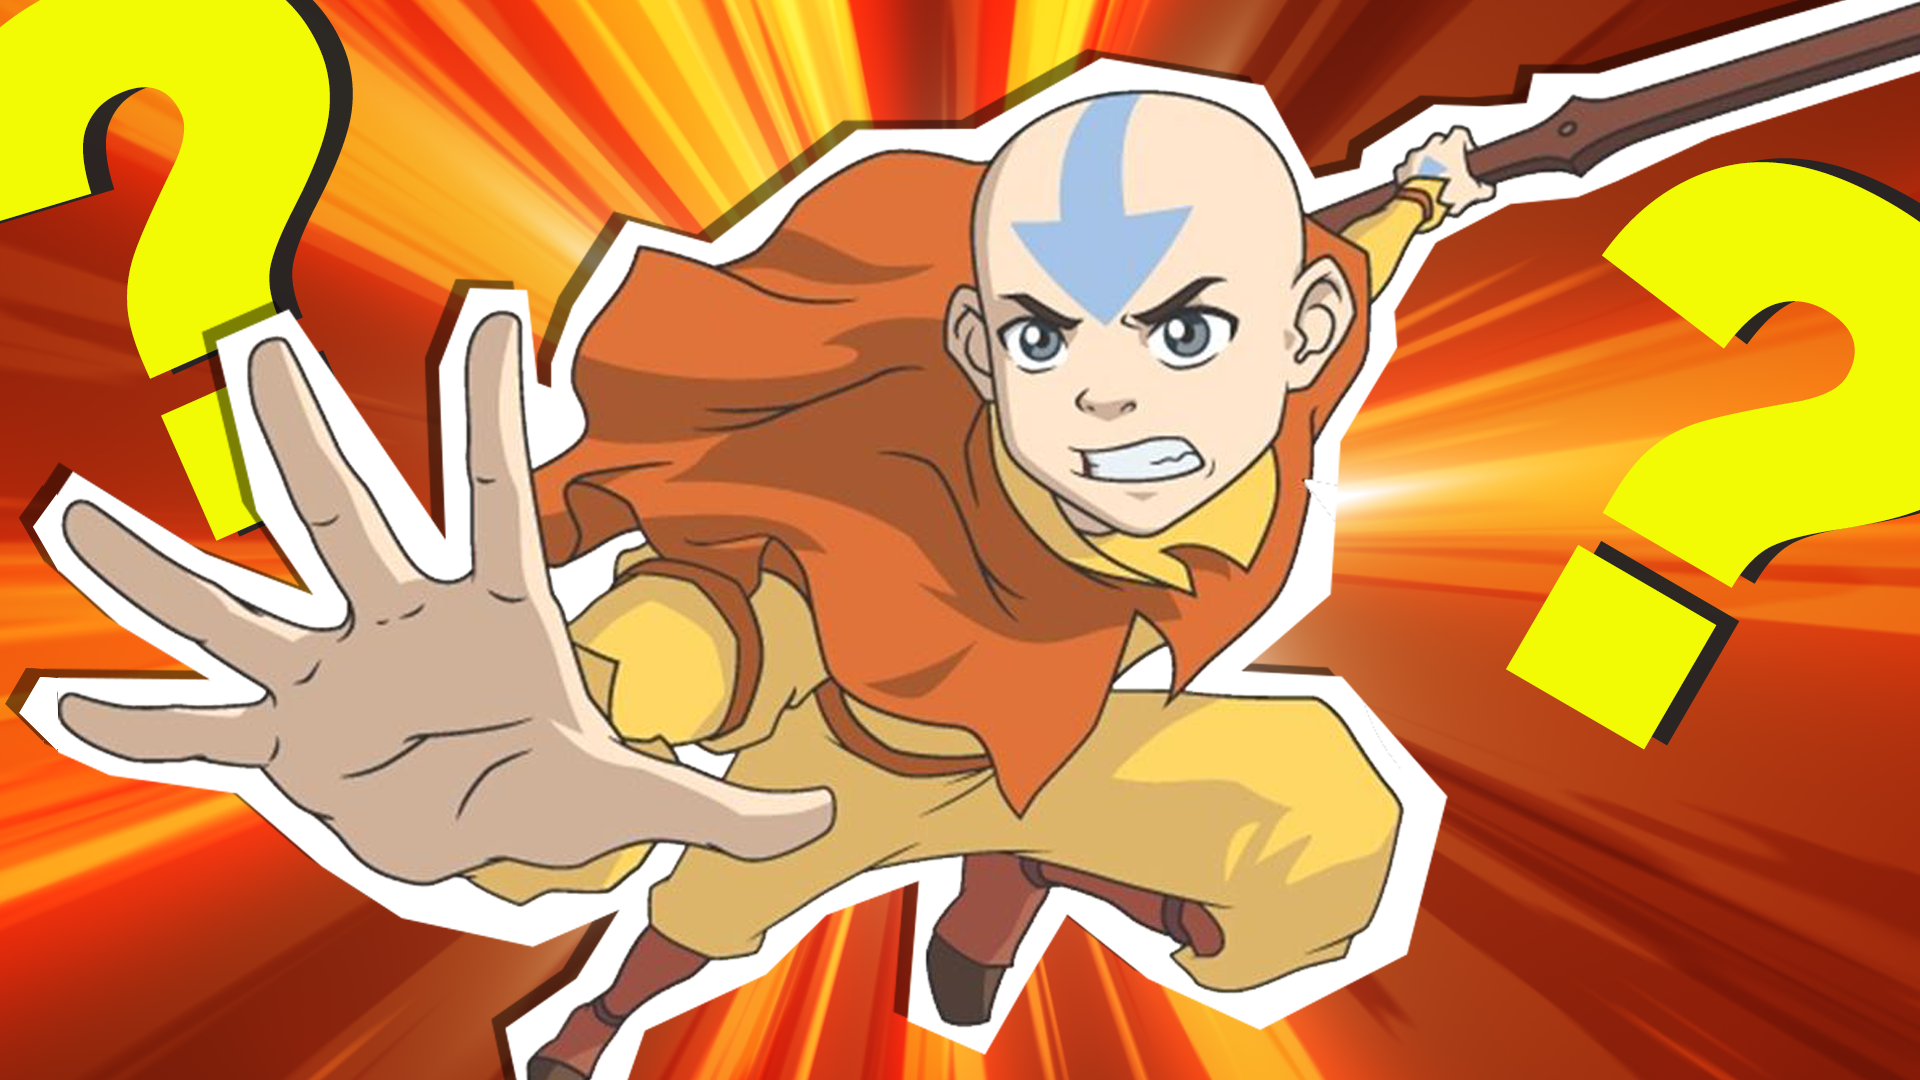 A Full Timeline of the Avatar the Last Airbender Universe